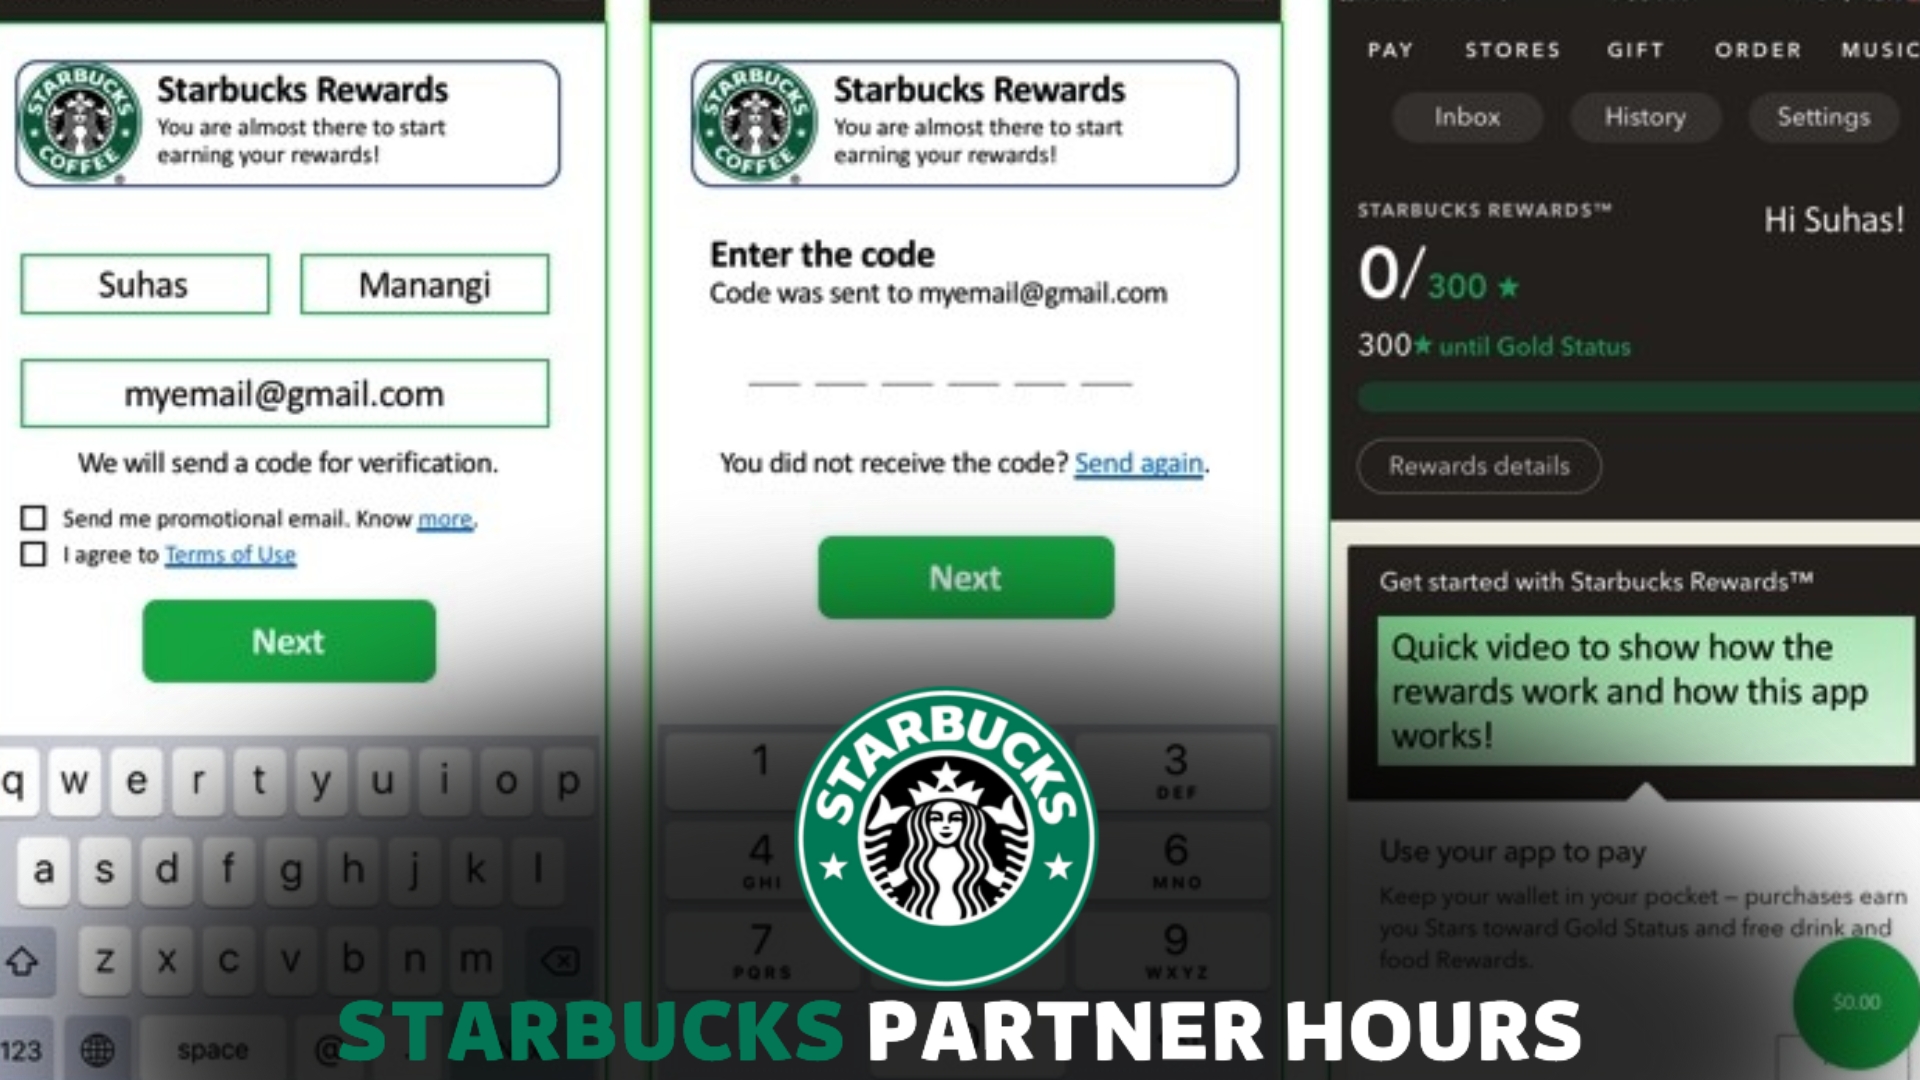 How to Update My Starbucks Profile With My Partner Number